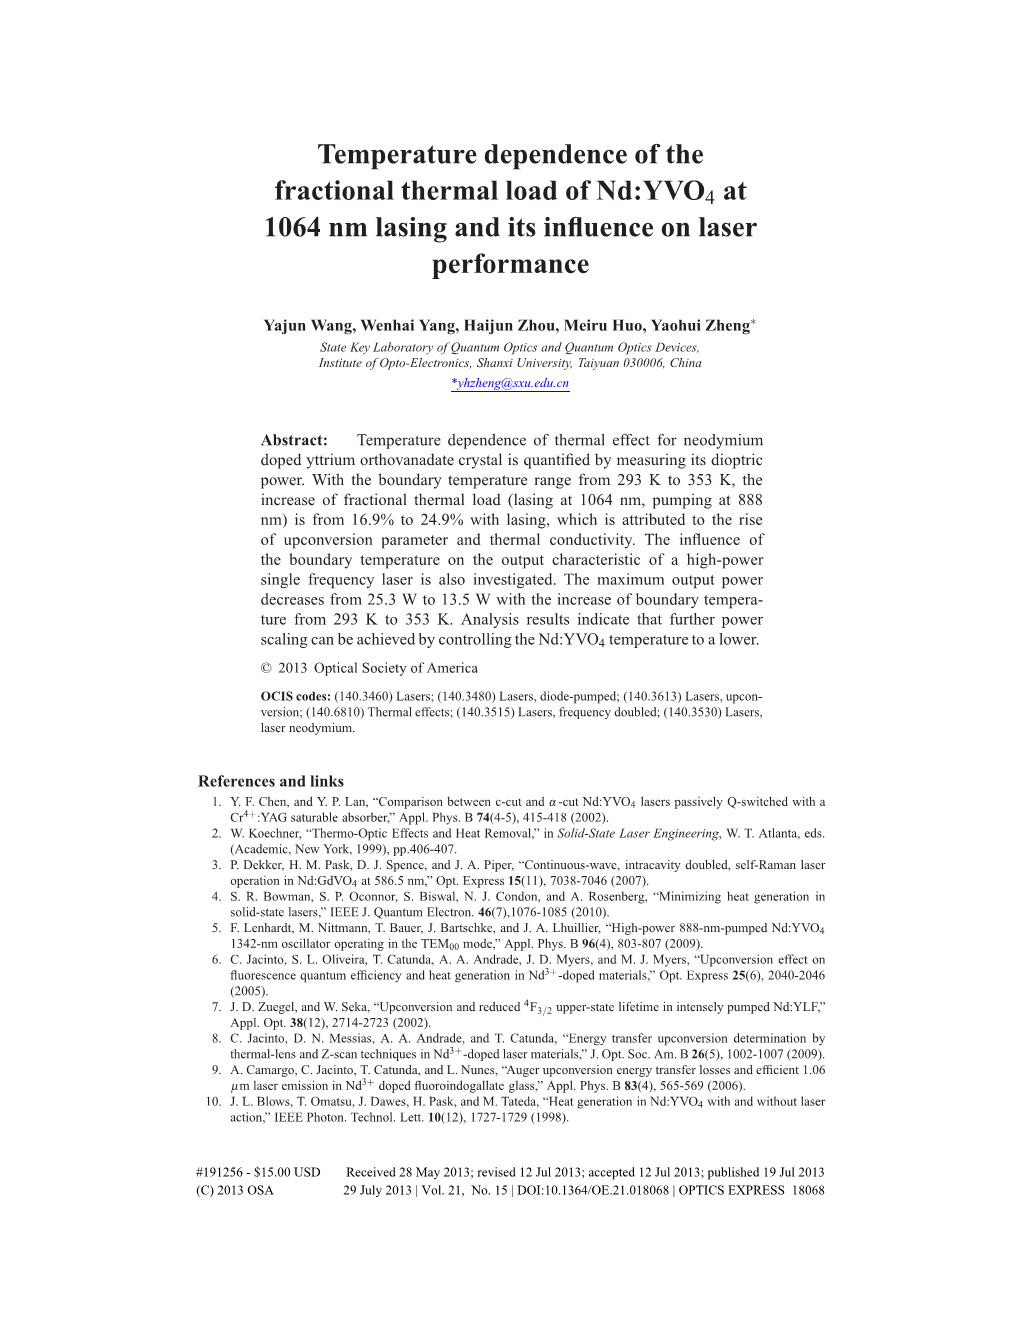 Temperature Dependence of the Fractional Thermal Load of Nd:YVO4 at 1064 Nm Lasing and Its Inﬂuence on Laser Performance